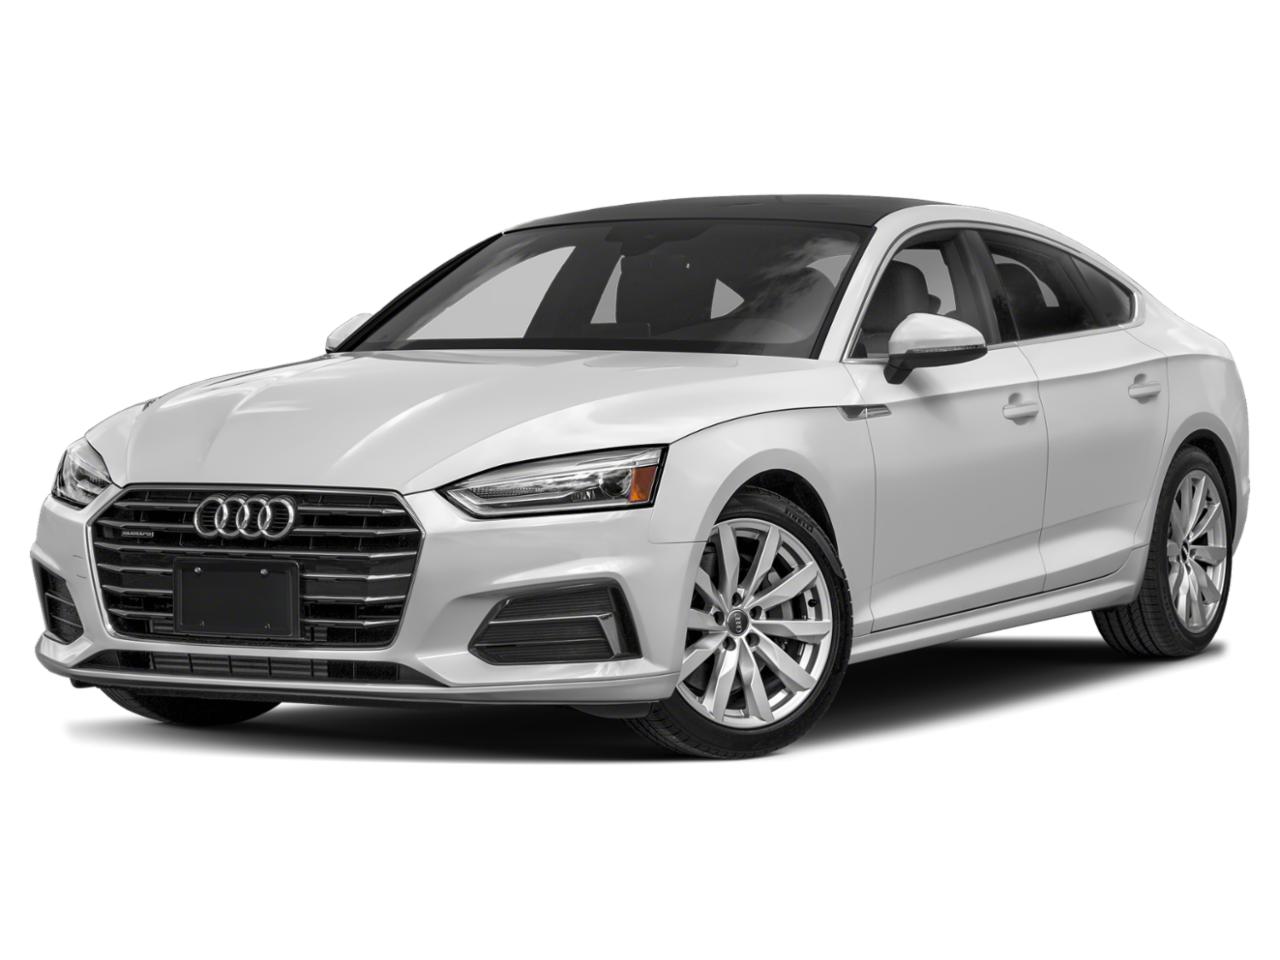 2019 Audi A5 Sportback Vehicle Photo in Allentown, PA 18103